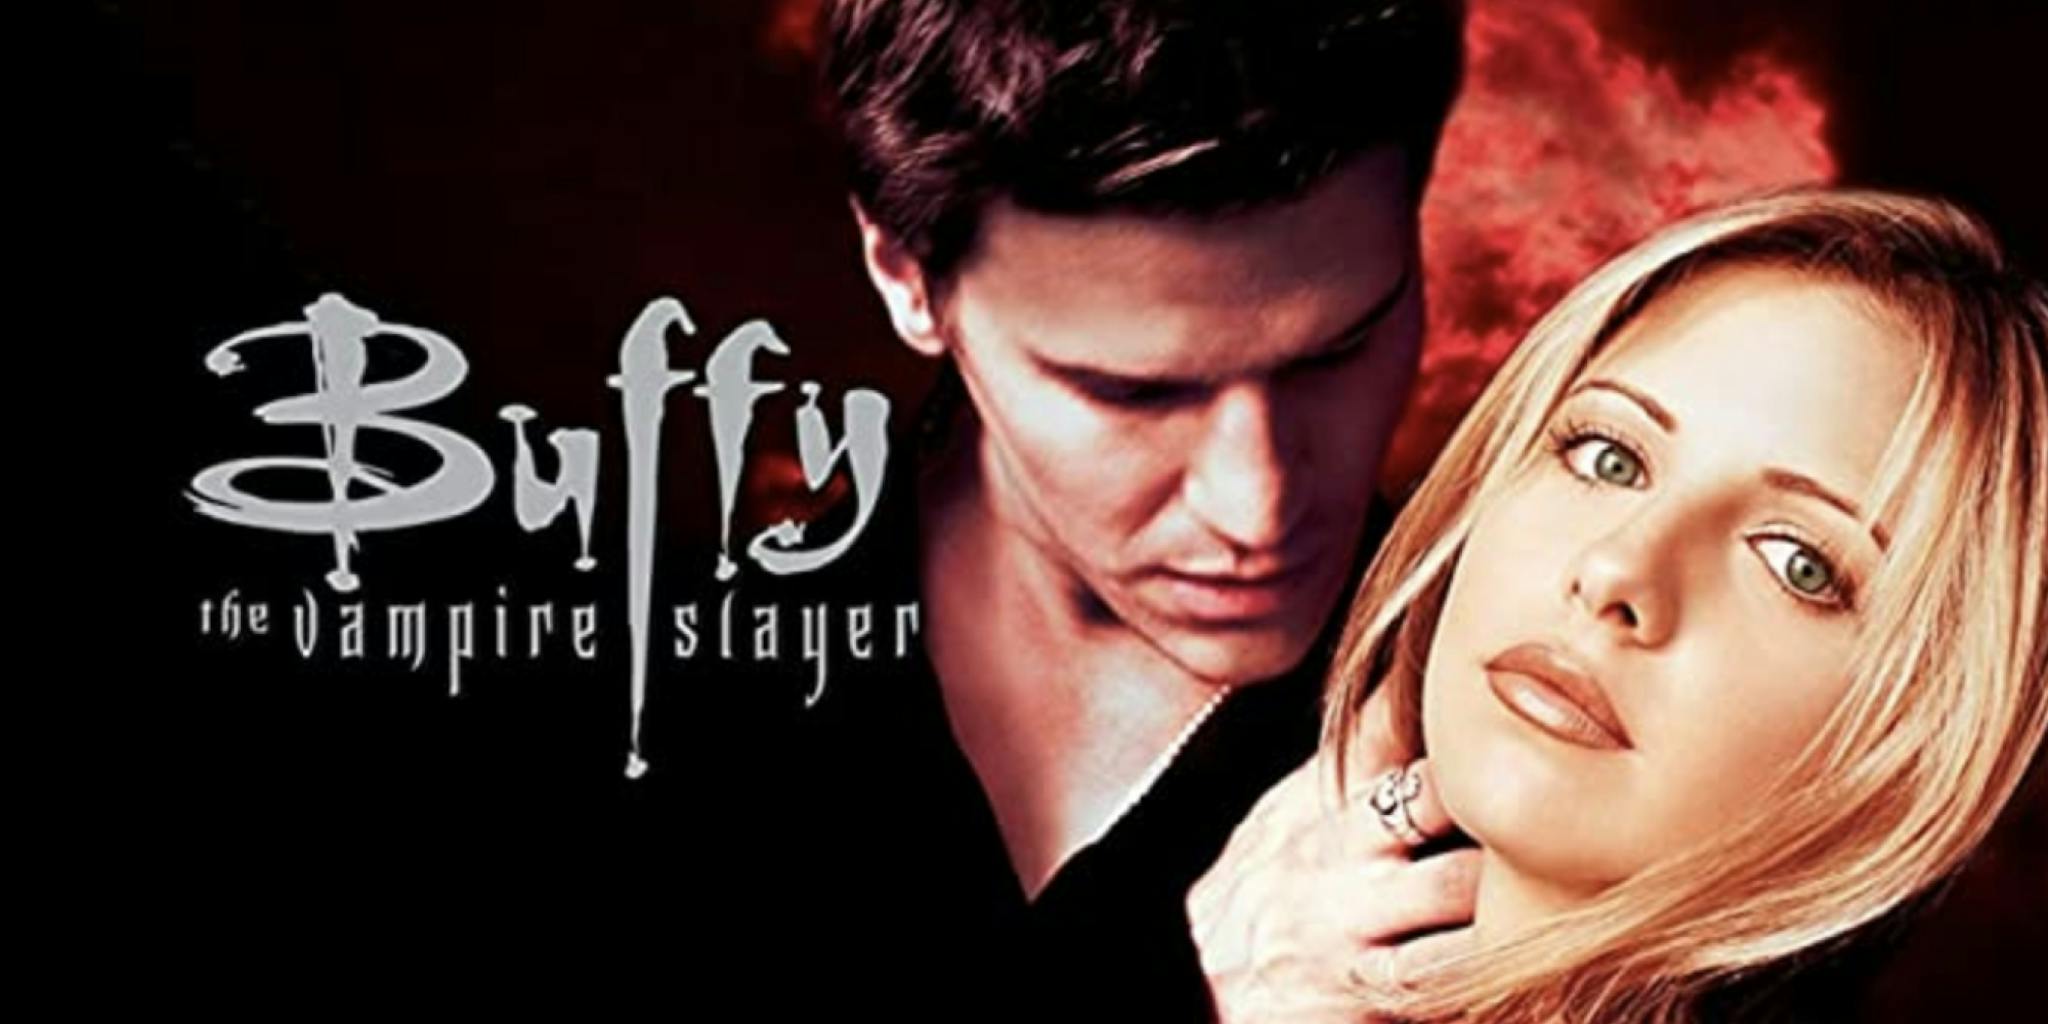 Can ‘Buffy’ survive Joss Whedon? How to love a problematic fave